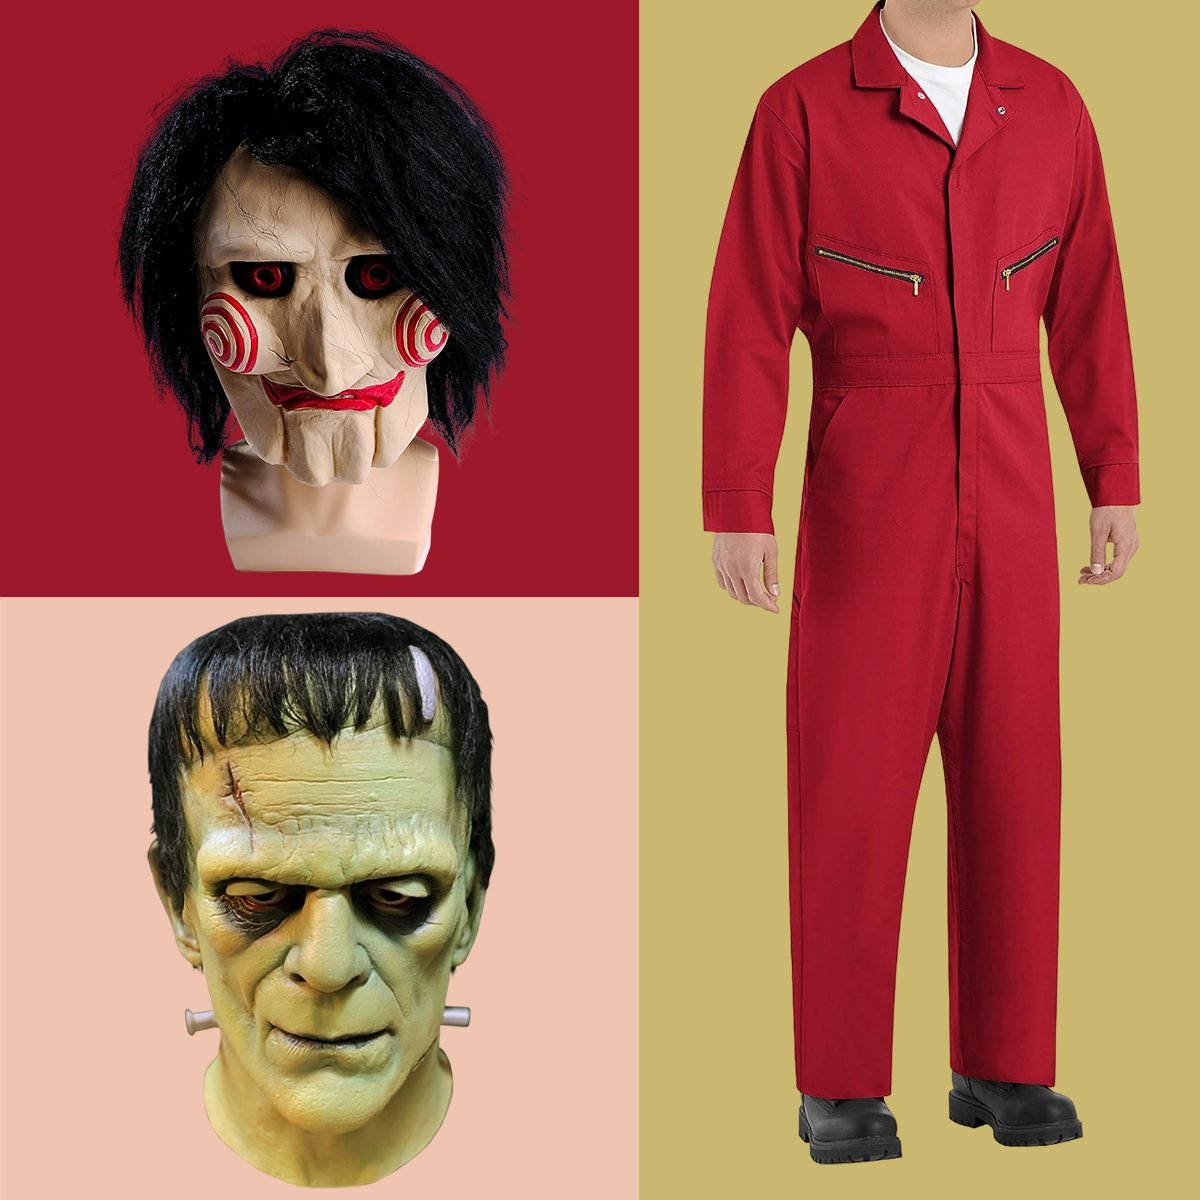 https://www.rd.com/wp-content/uploads/2021/08/55-Scary-Halloween-Costumes-That-Will-Spook-Everyone_FT_via-amazon.com_.jpg